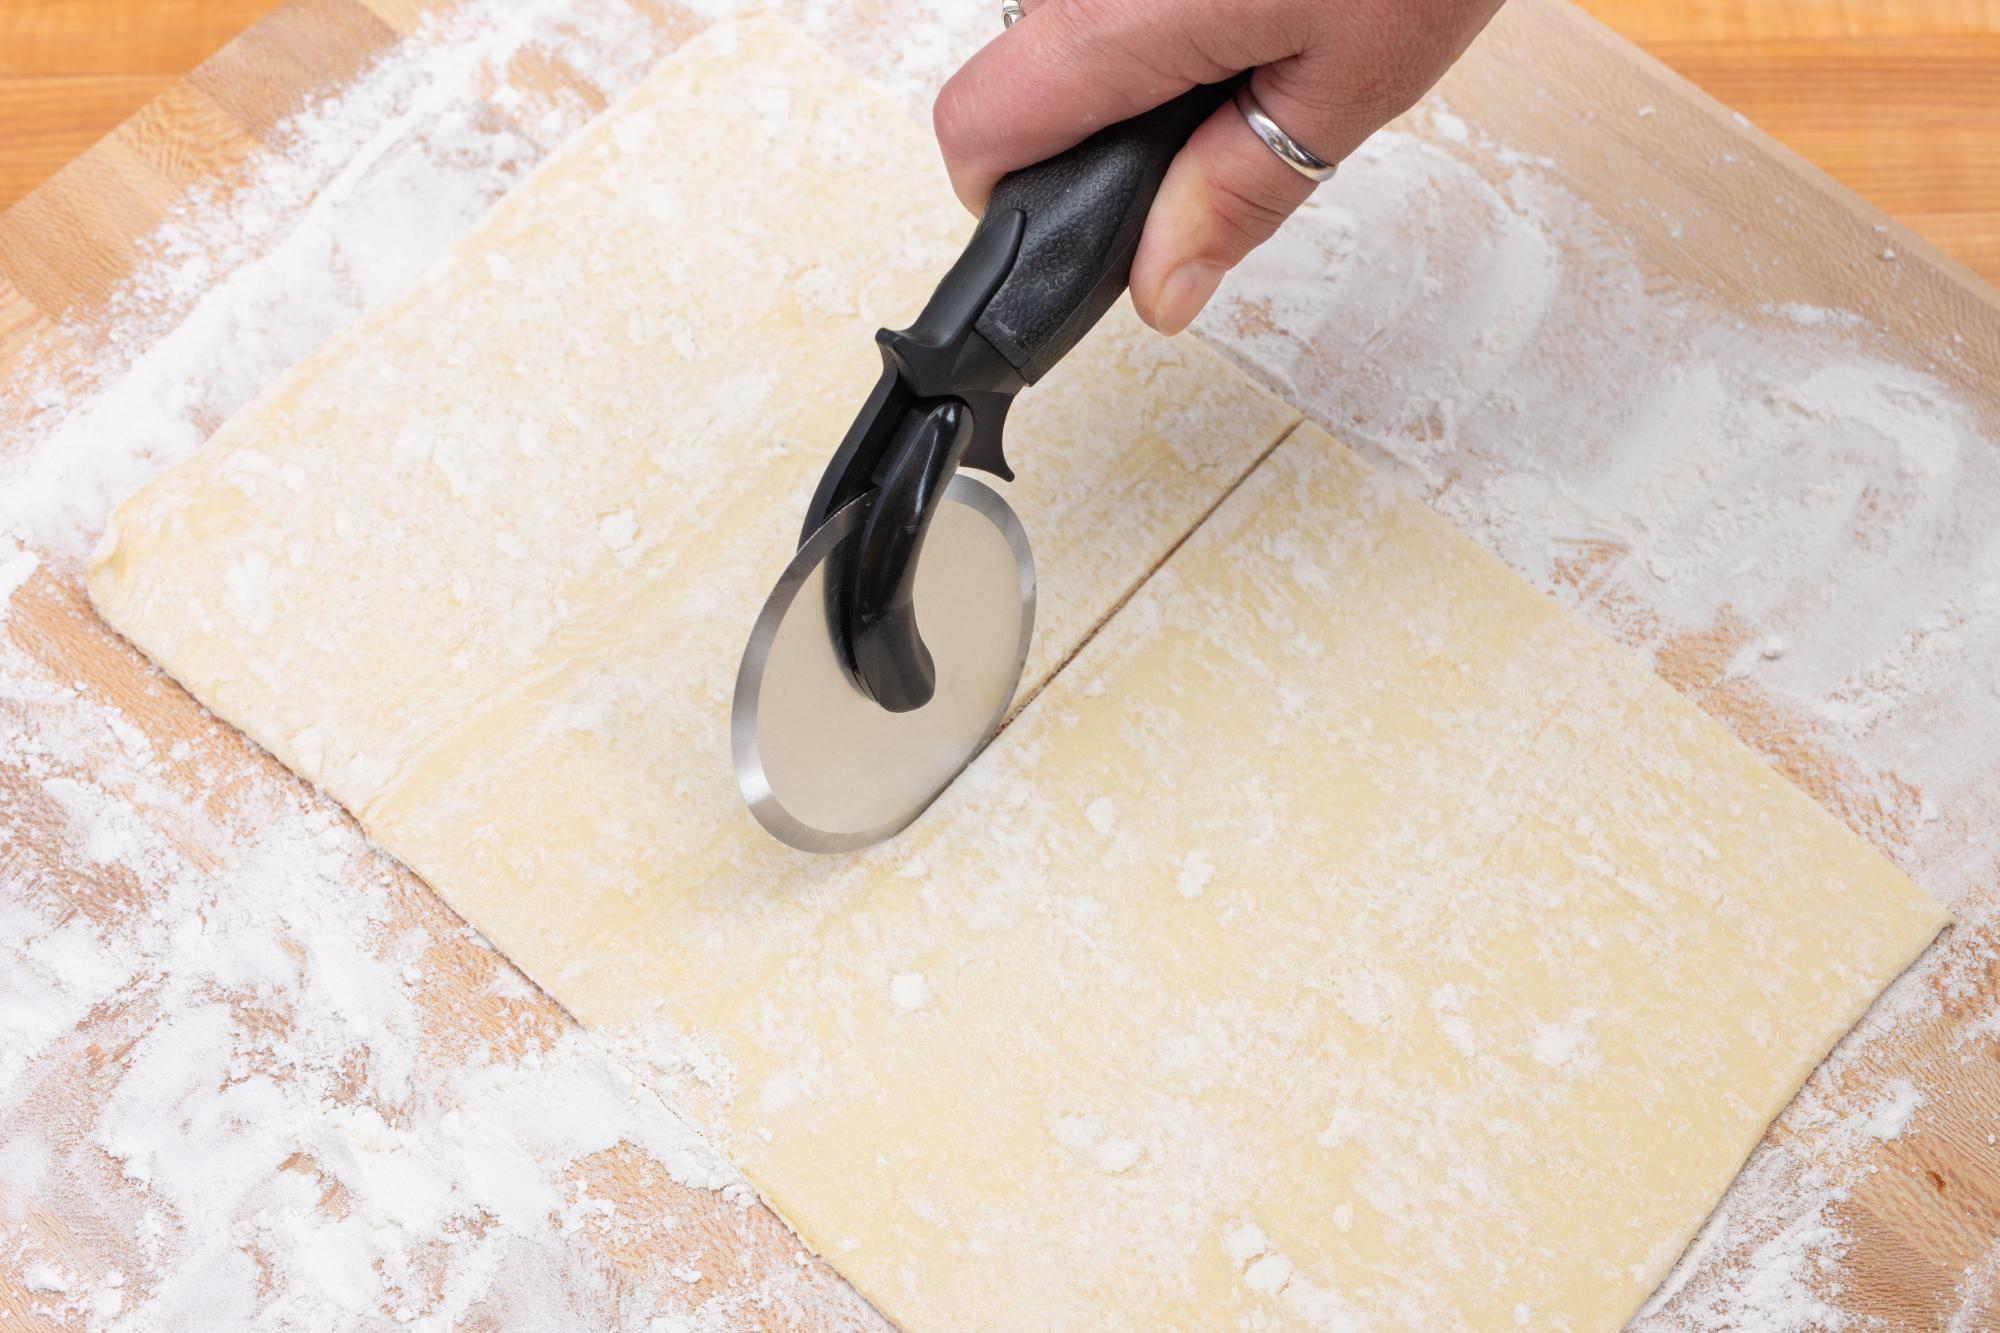 Using a Pizza Cutter to cut the puff pastry.